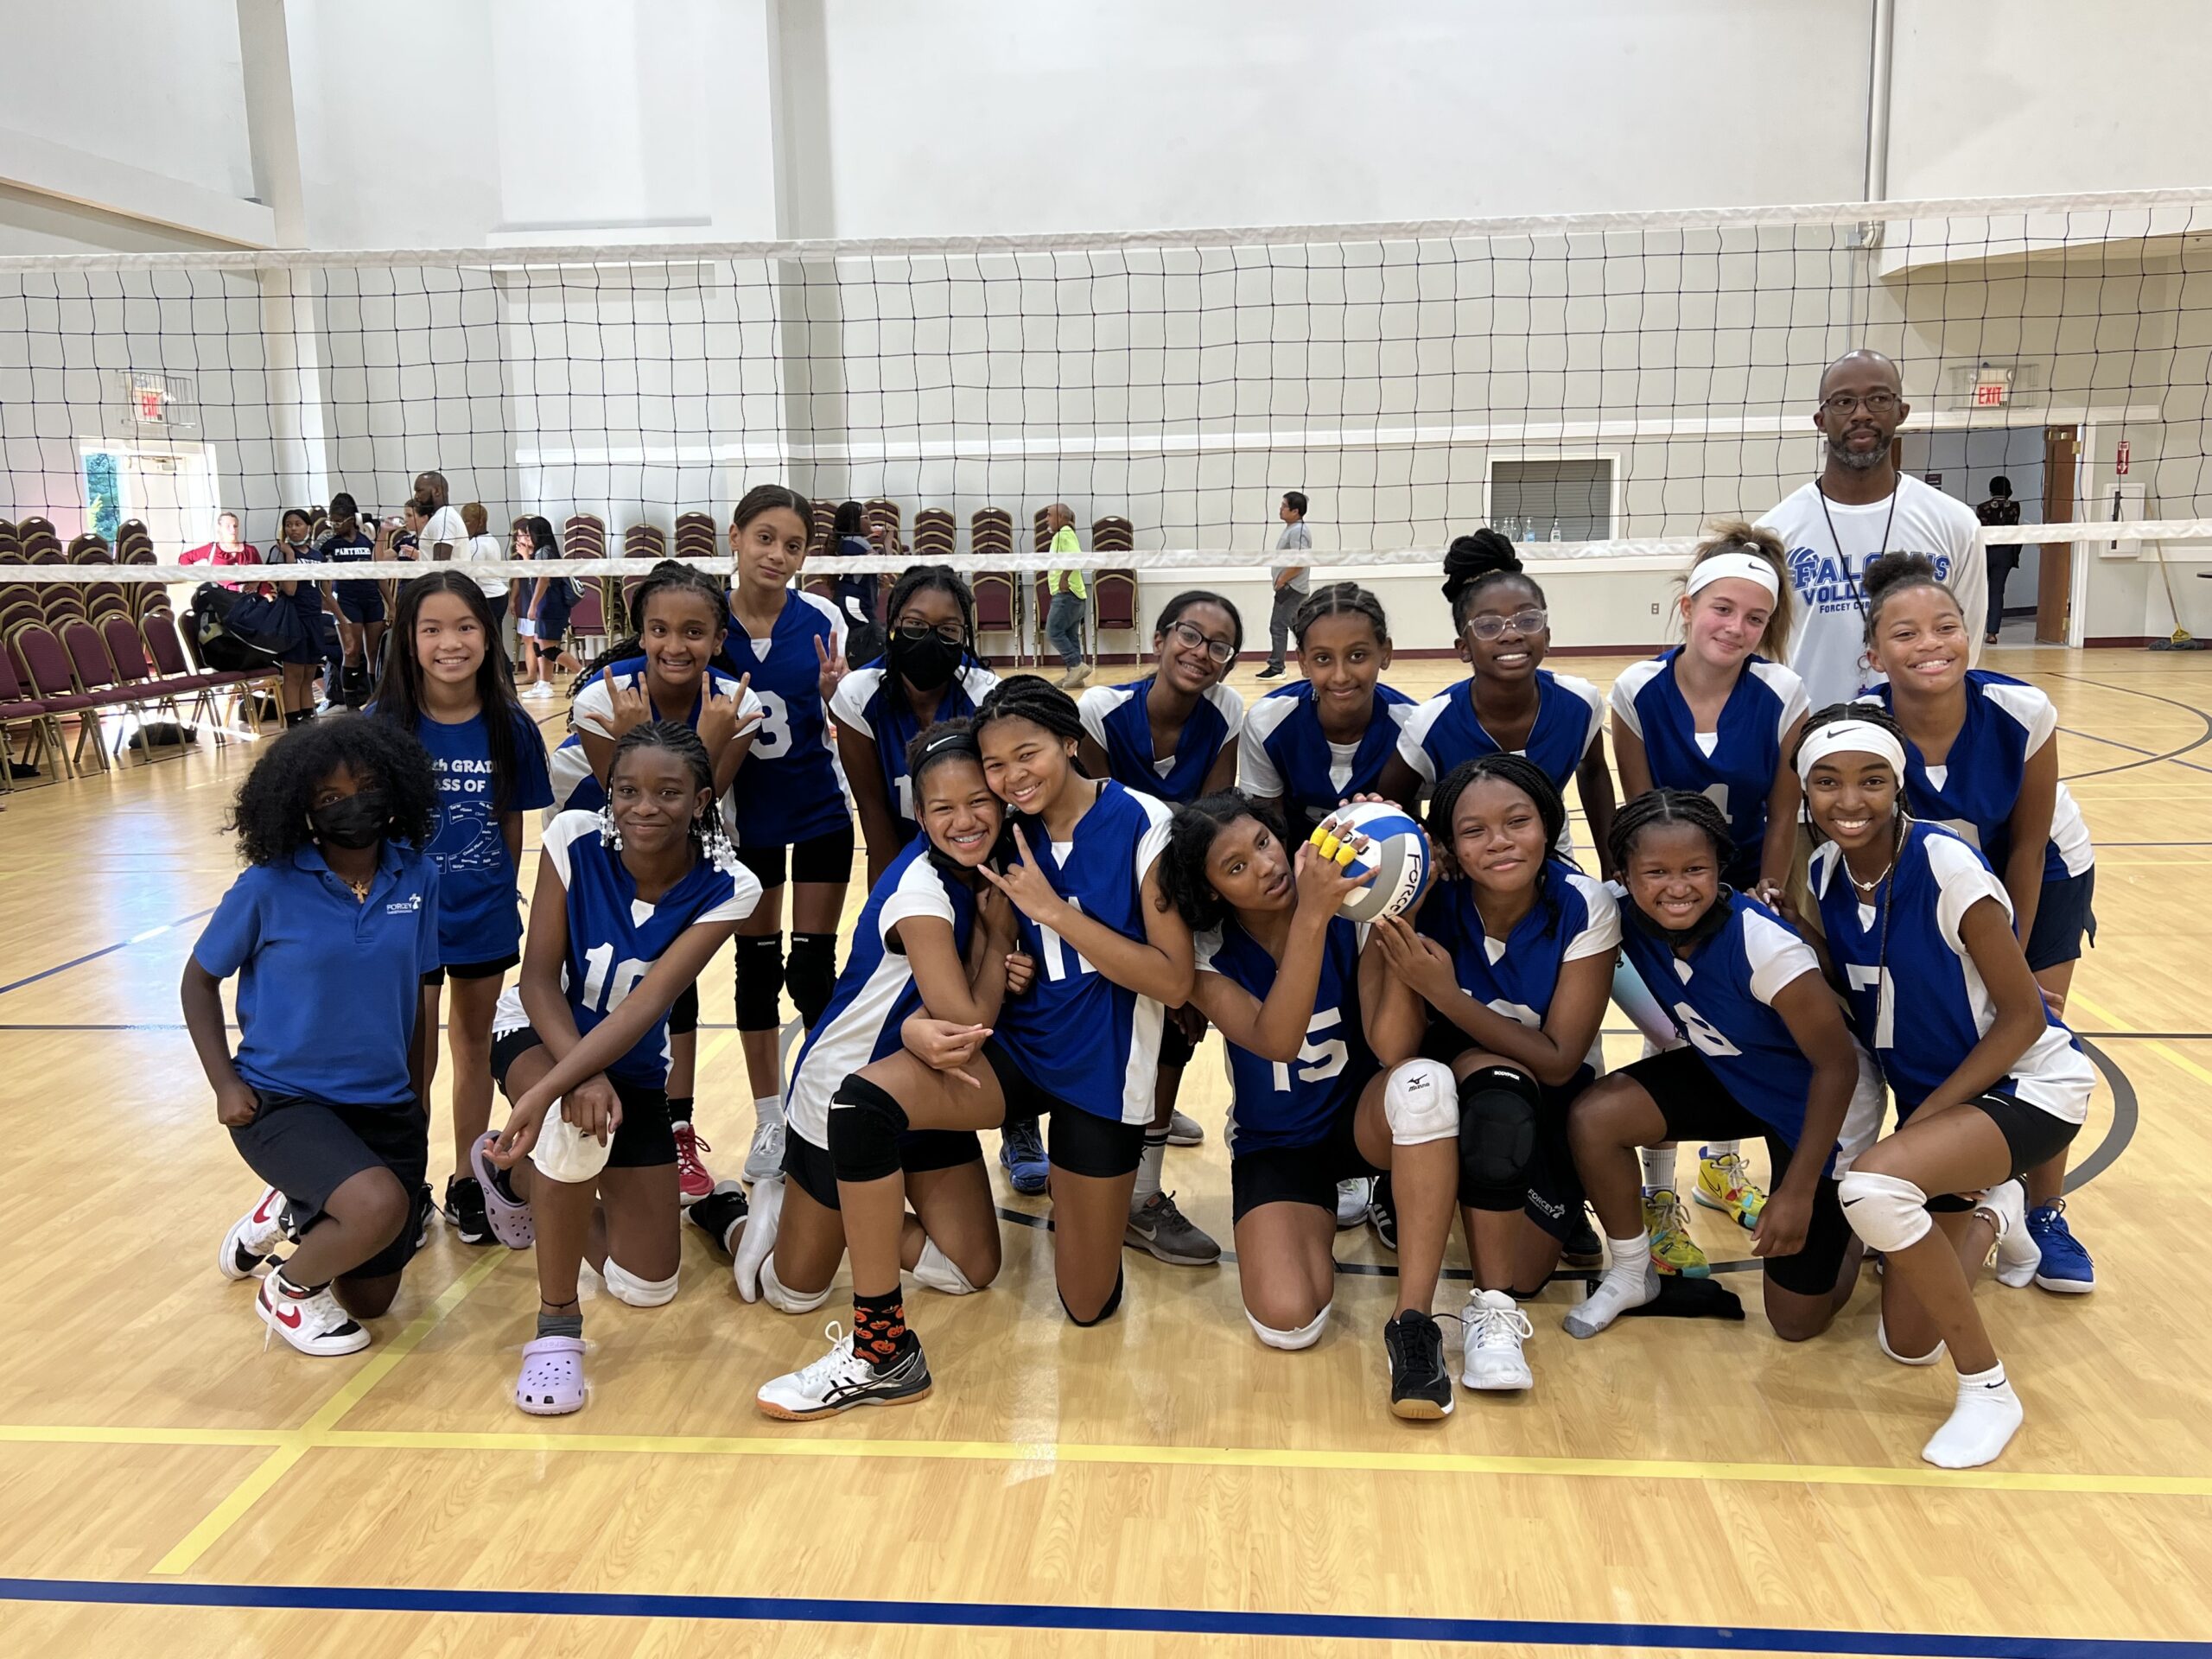 Lady Falcons with Coach posing by the net